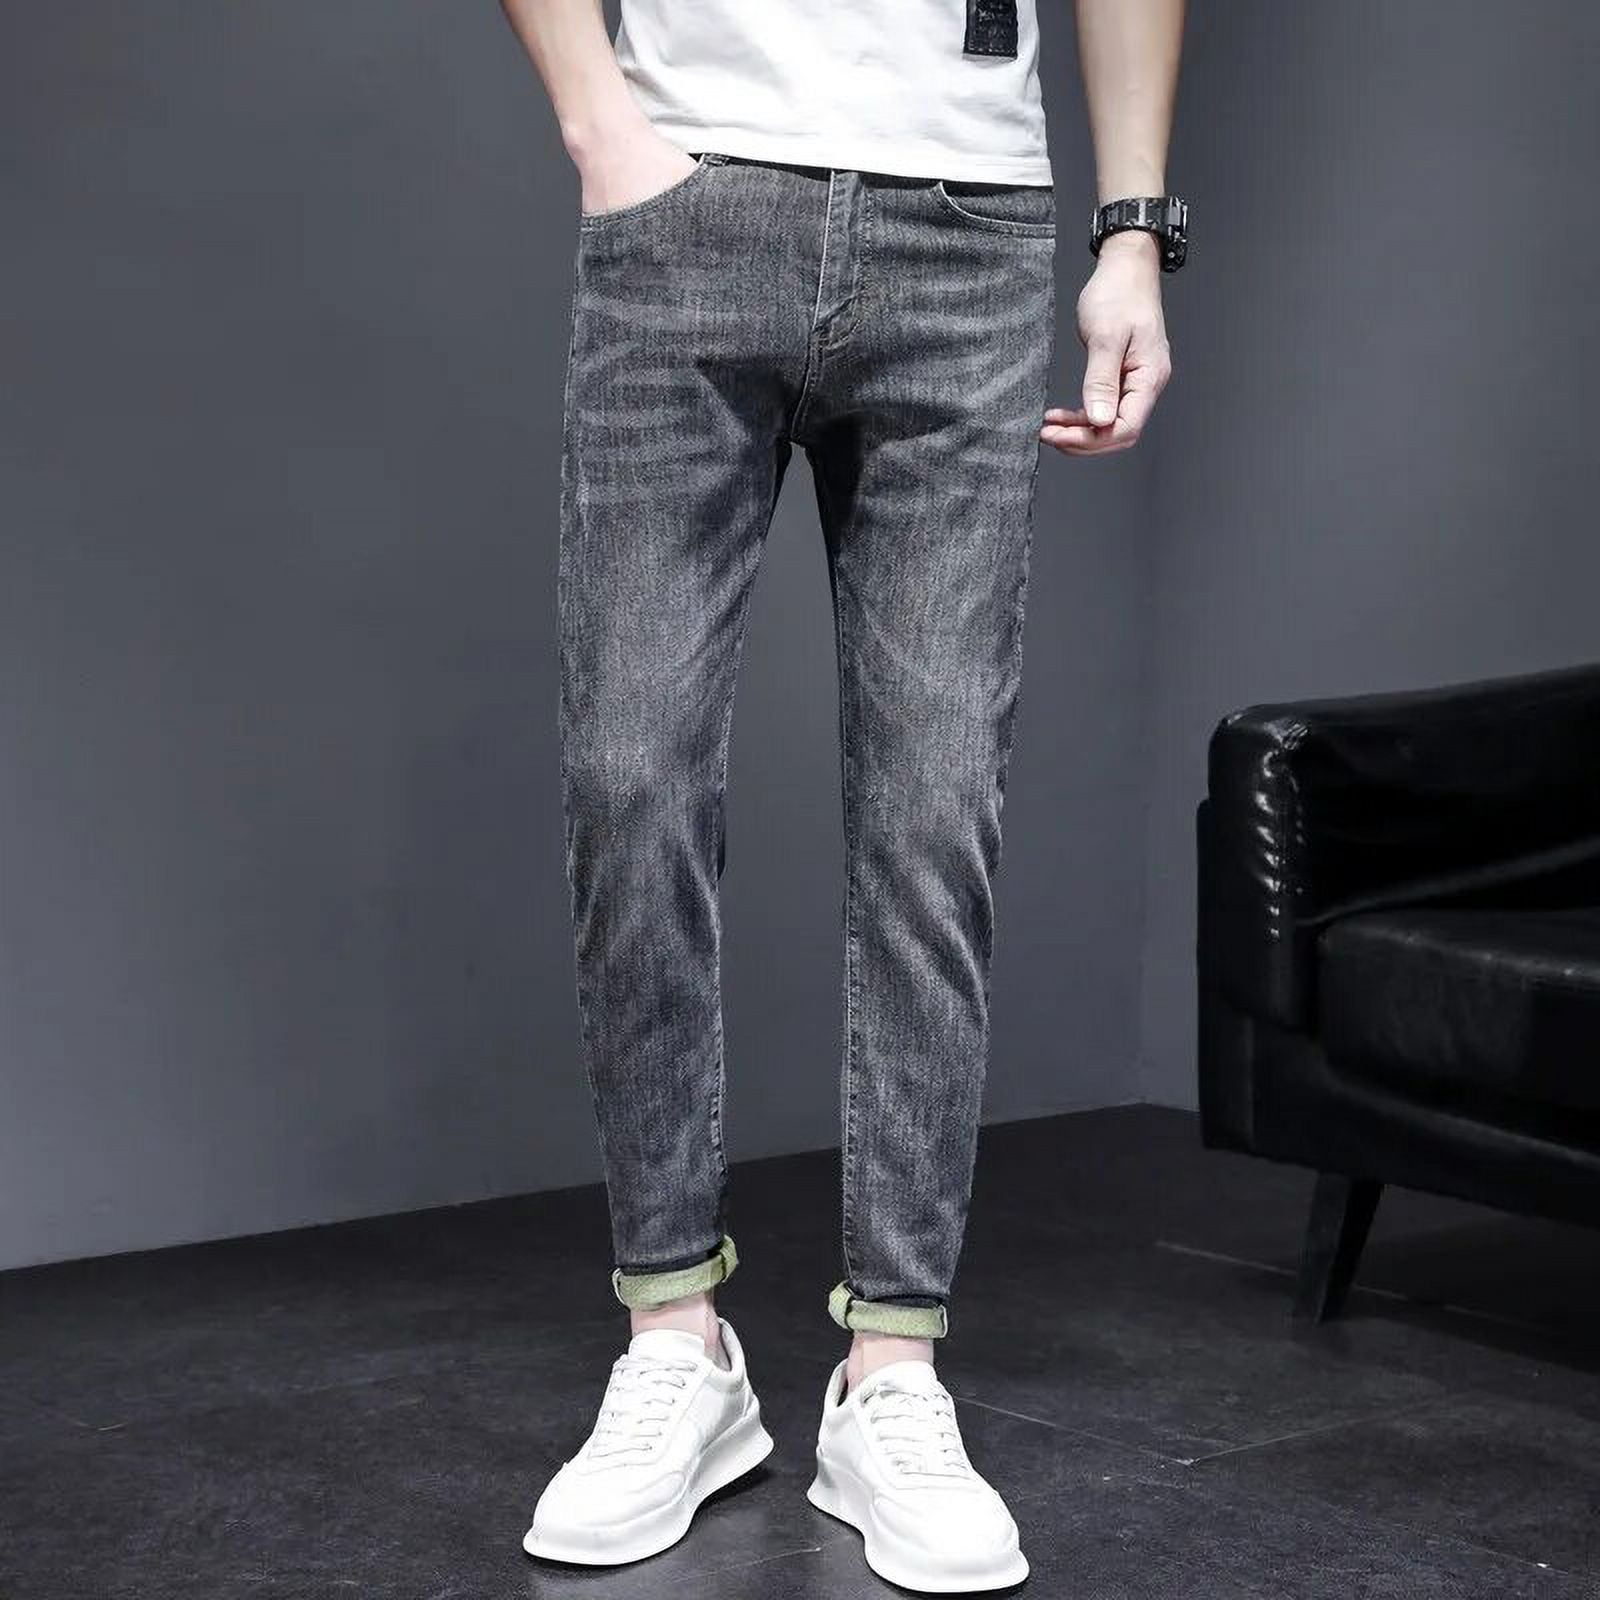 Men's Jeans Fashion Brand Spring and Autumn New Style Slim Fit Small Feet  Fashion Casual Summer Thin Cropped Pants - Walmart.com